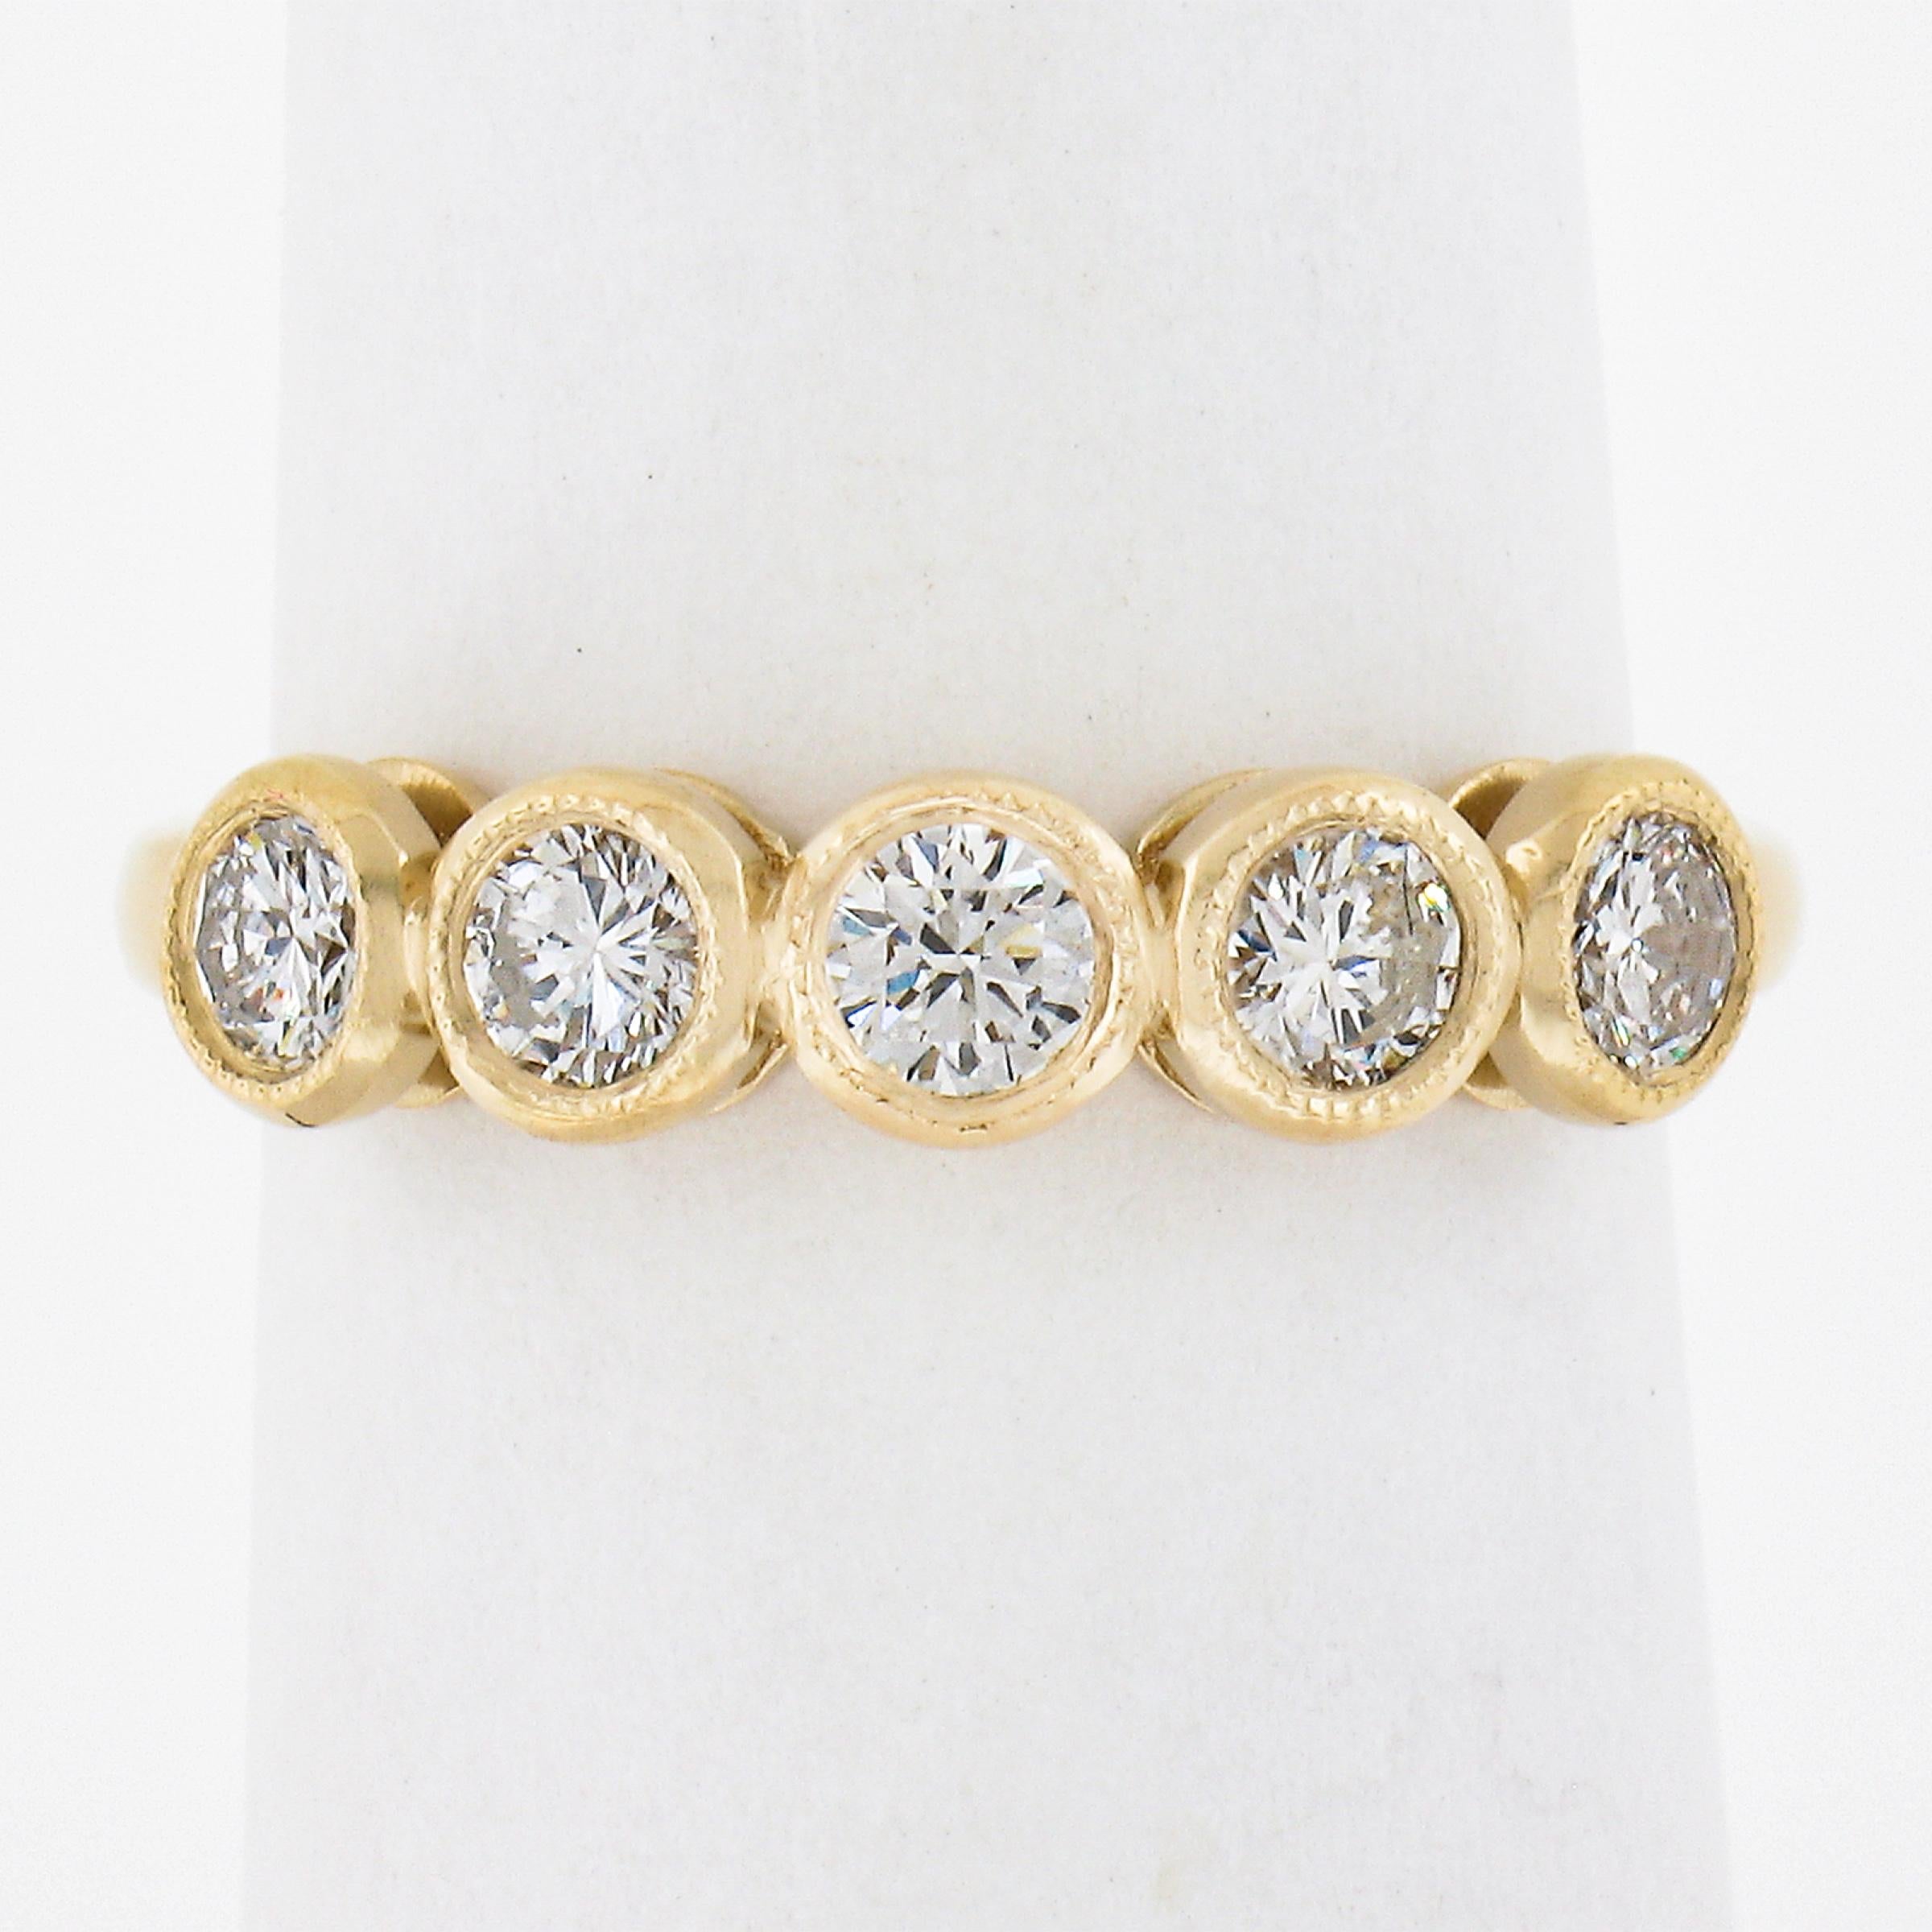 --Stone(s):--
(5) Natural Genuine Diamonds - Round Brilliant Cut - Milgrain Bezel Set - G/H Color - VS1/VS2 Clarity 
Total Carat Weight:	0.63 (exact)

Material: Solid 18k Yellow Gold
Weight: 3.45 Grams
Ring Size: 6.5 (Fitted on a finger. We can